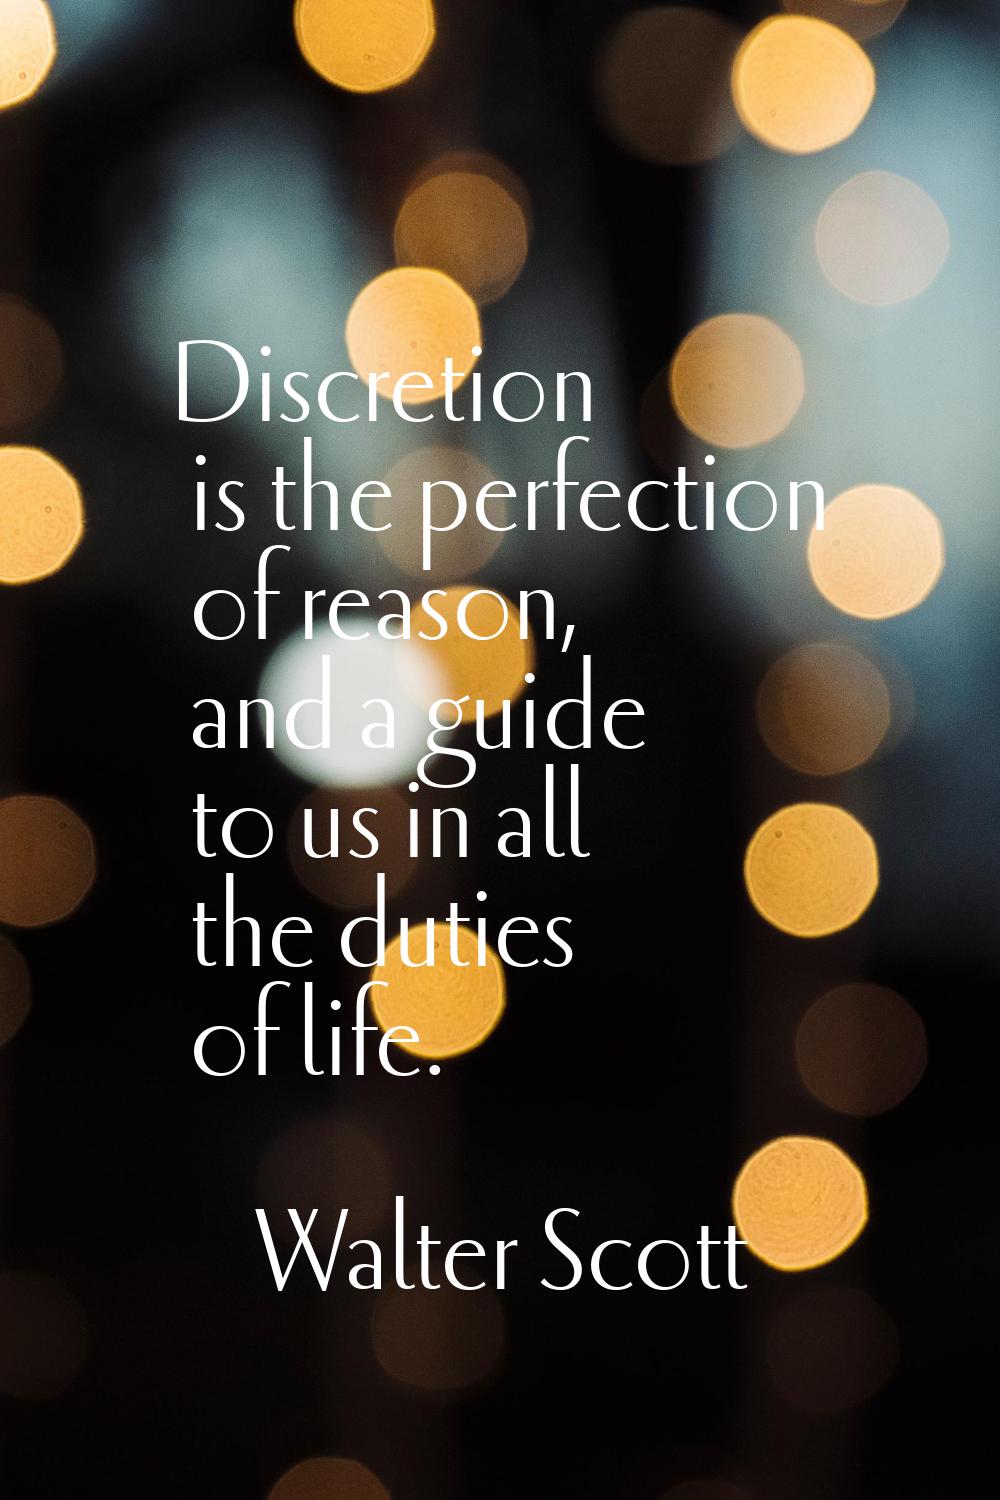 Discretion is the perfection of reason, and a guide to us in all the duties of life.